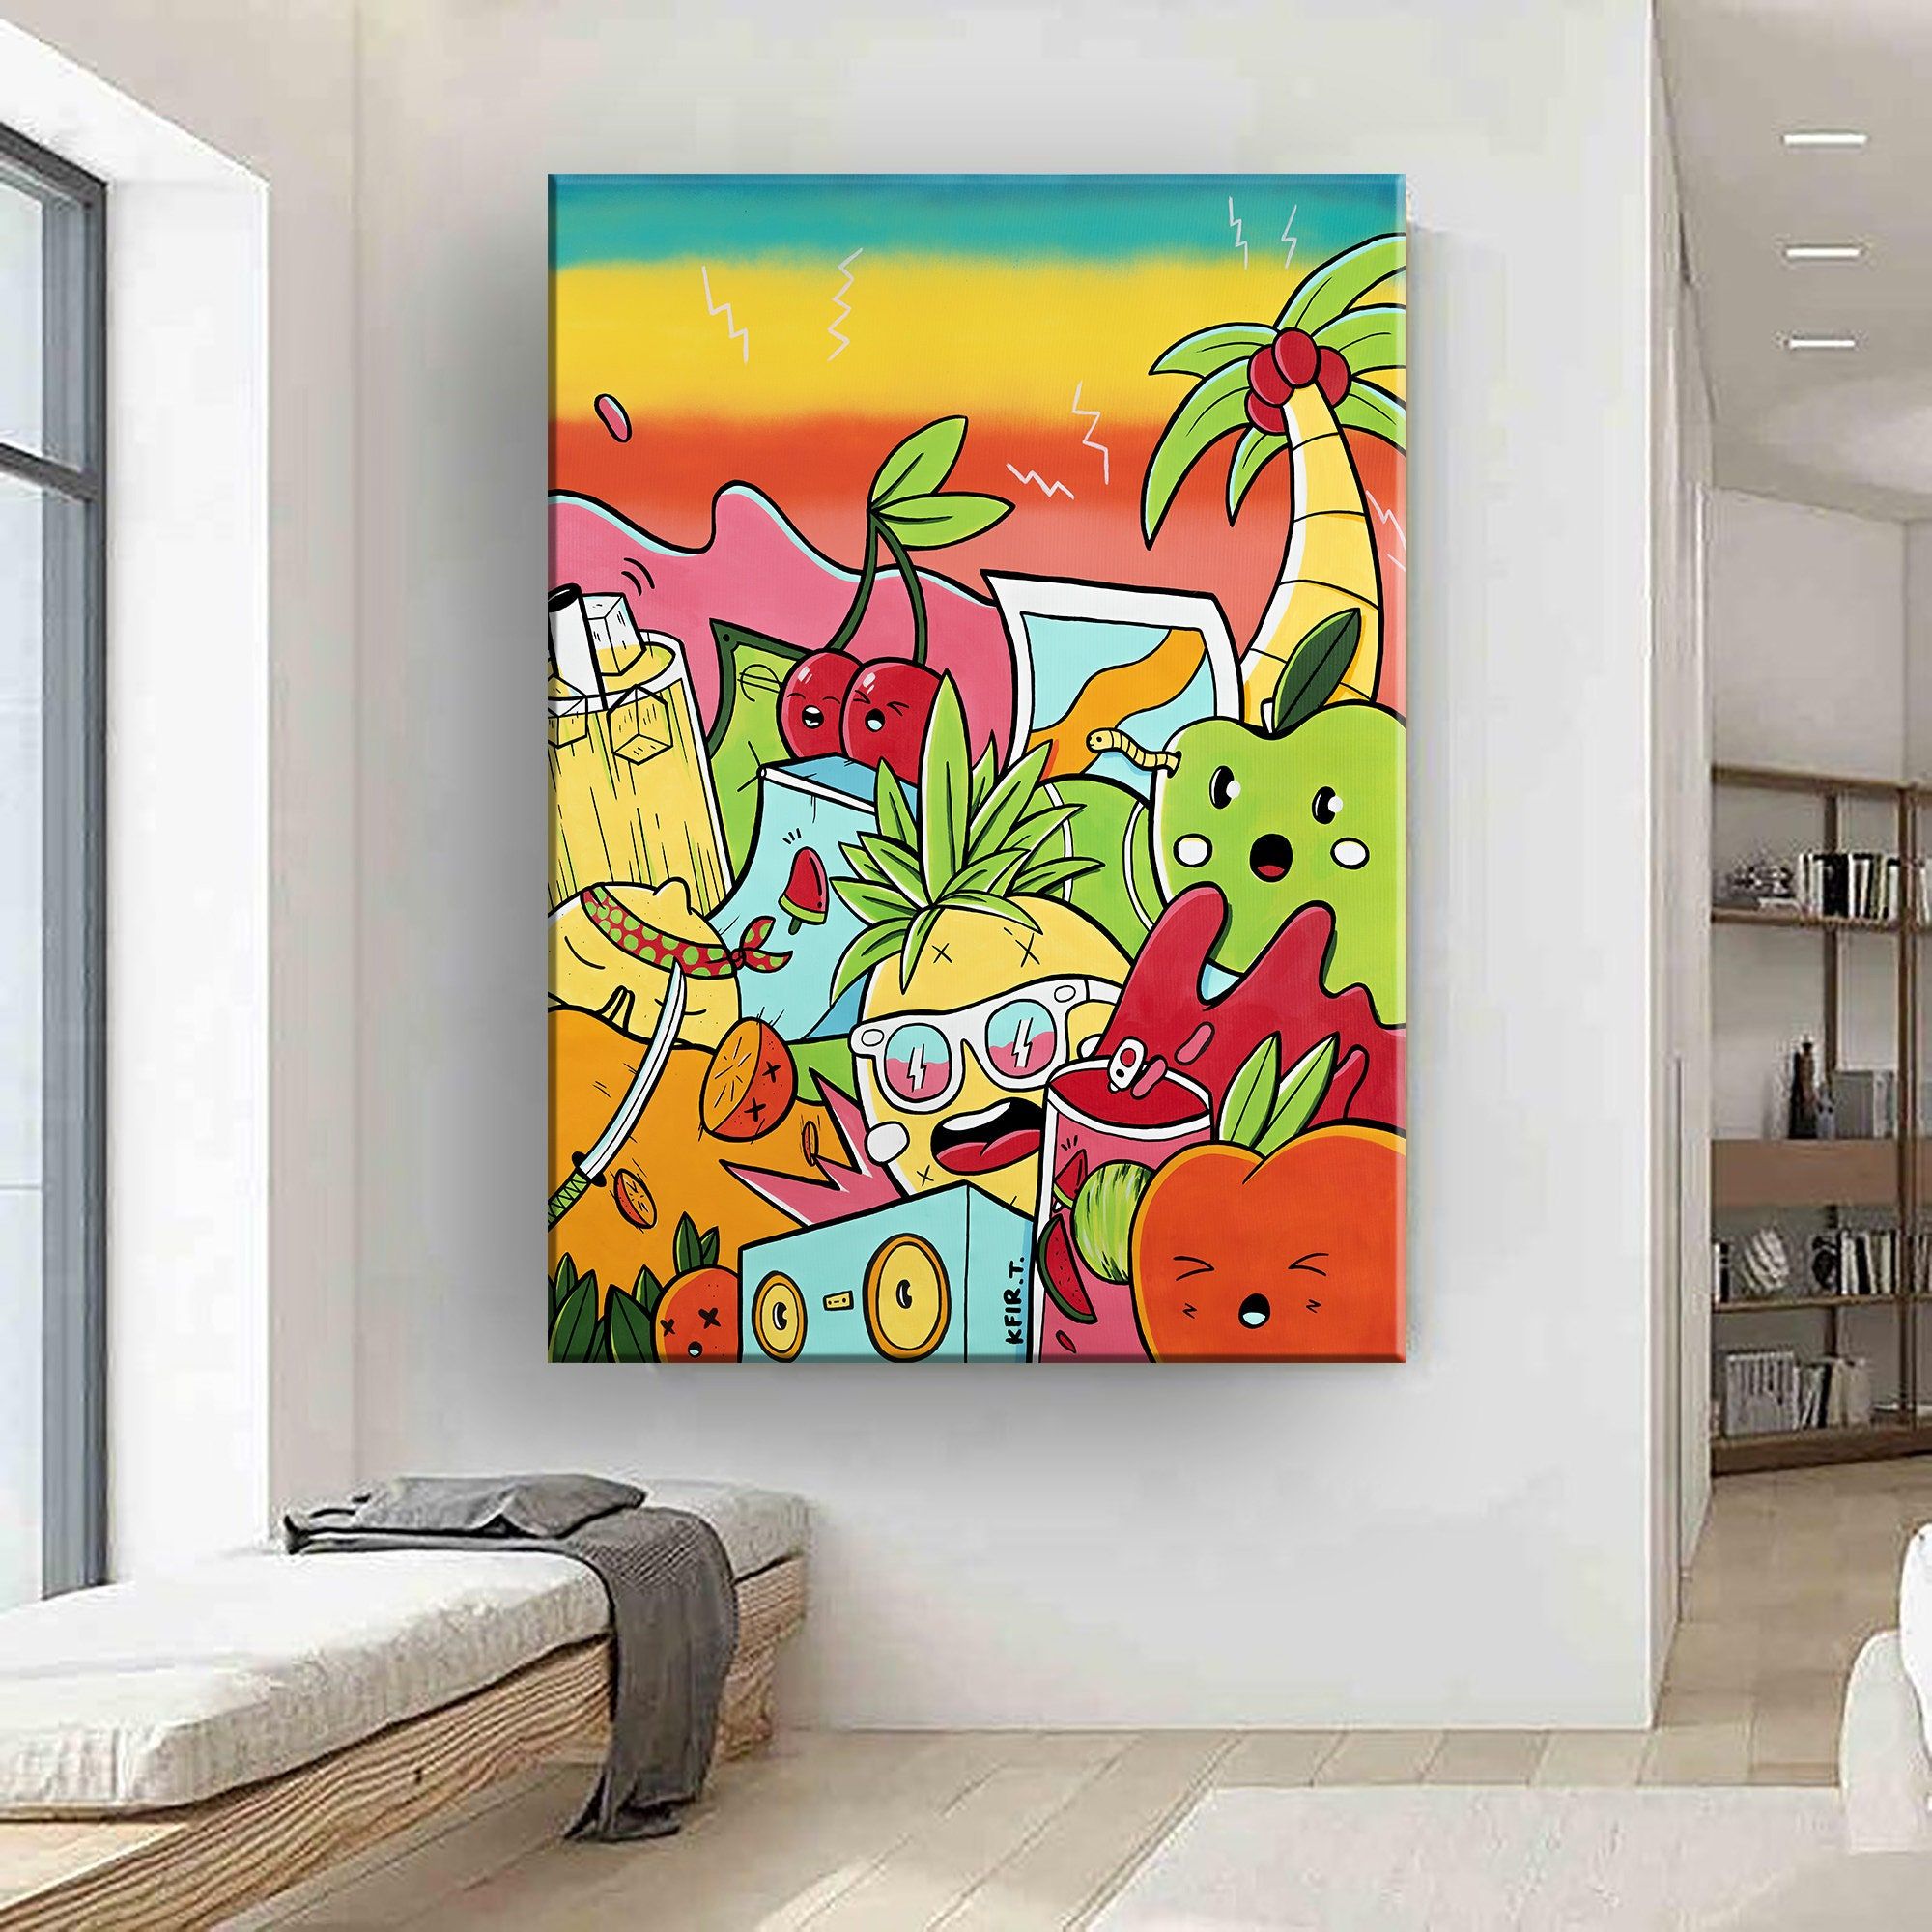 Extra Large Graffiti Style Wall Art Vertical Colorful Street – Etsy Throughout Graffiti Style Wall Art (View 1 of 15)